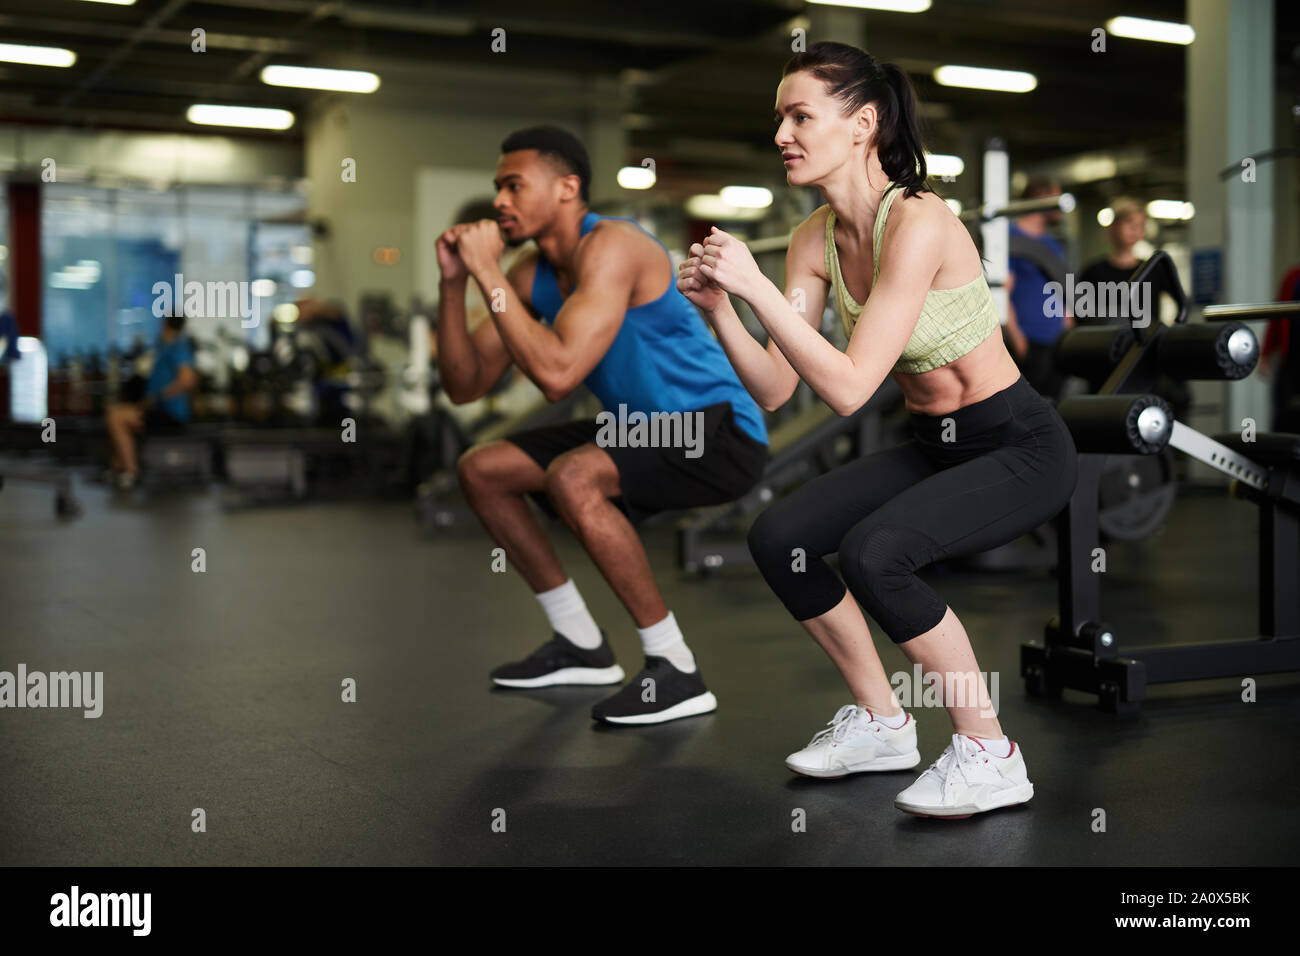 Side view portrait of sportive couple doing squats during fitness workout in modern gym, copy space Stock Photo